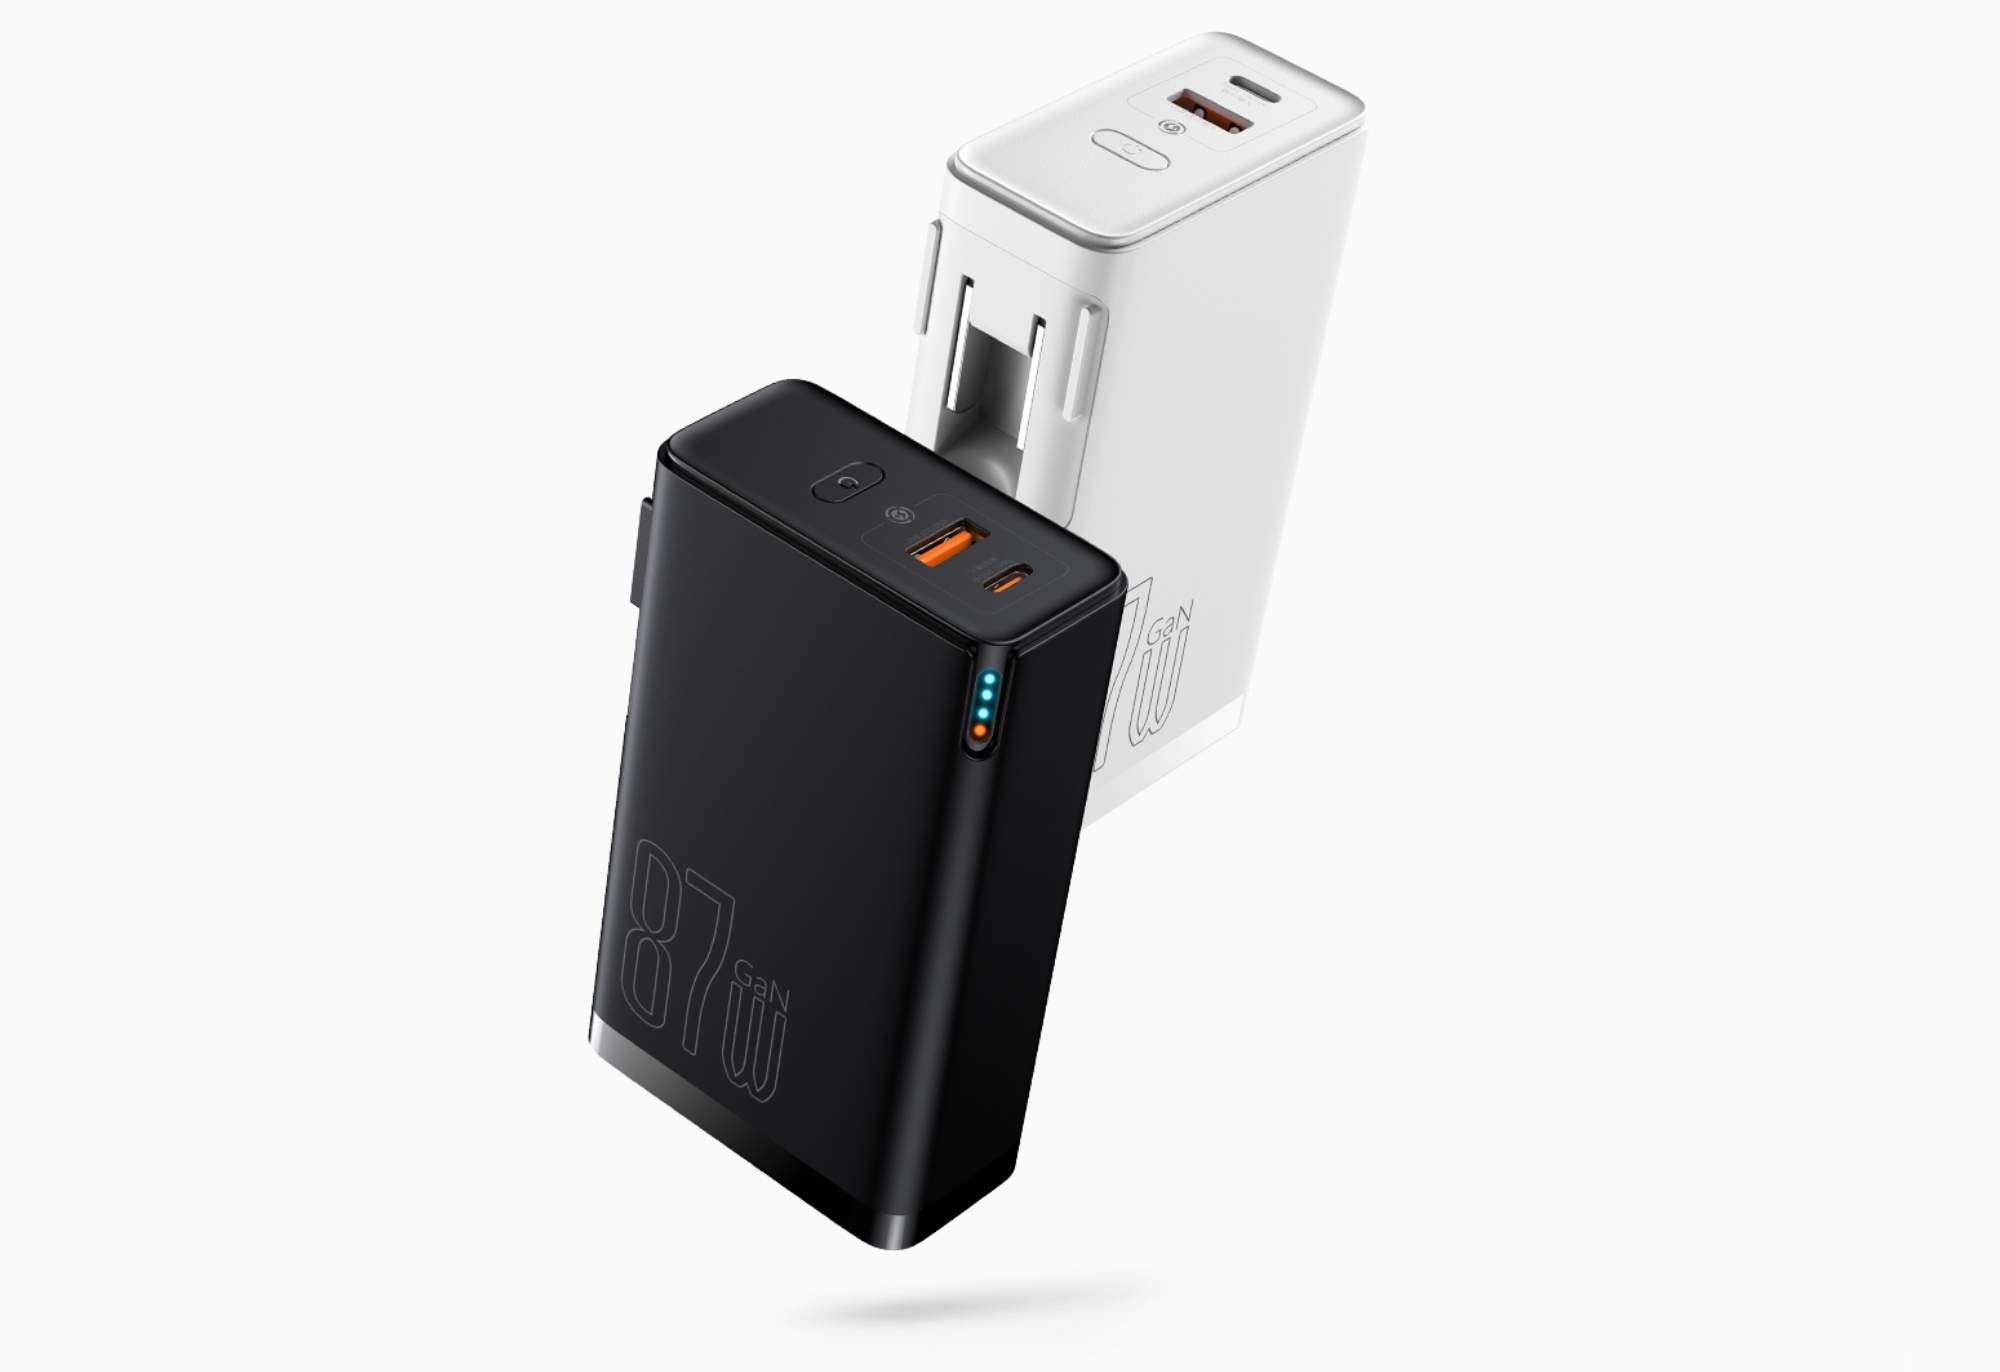 Baseus announces 87W power supply with built-in 10000mAh battery and two USB ports